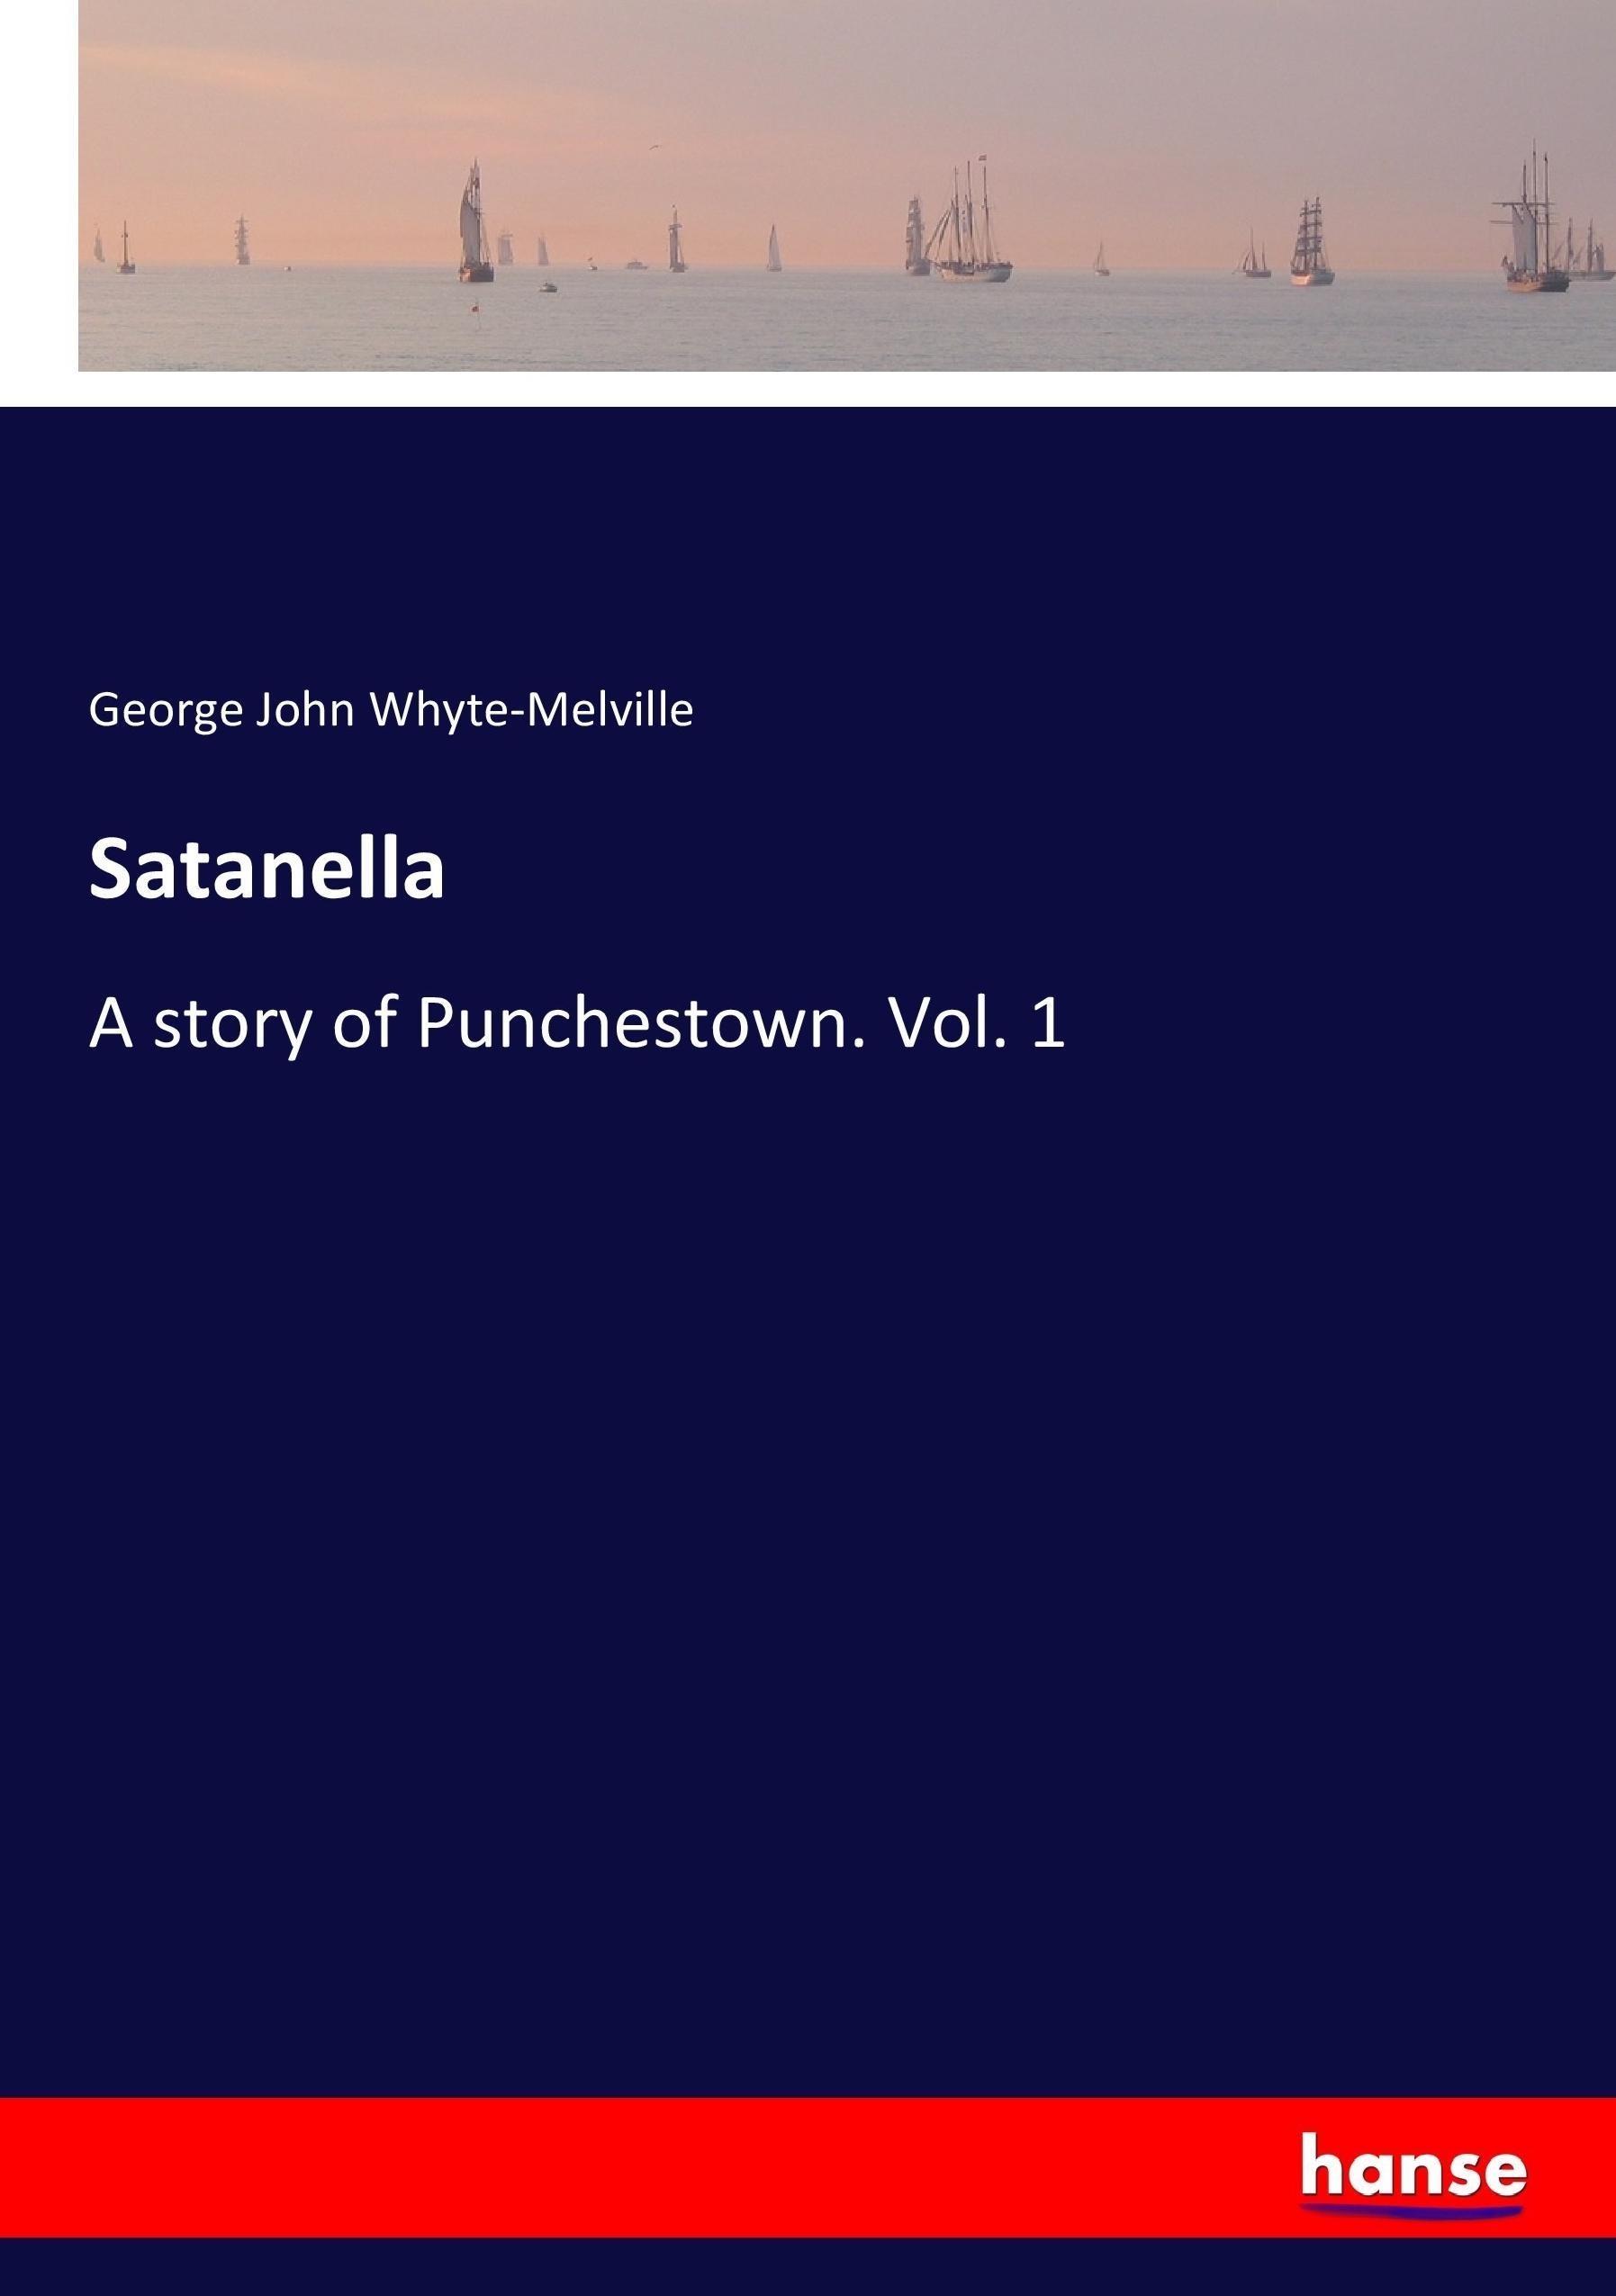 Satanella / A story of Punchestown. Vol. 1 / George John Whyte-Melville / Taschenbuch / Paperback / 272 S. / Englisch / 2017 / hansebooks / EAN 9783337301224 - Whyte-Melville, George John